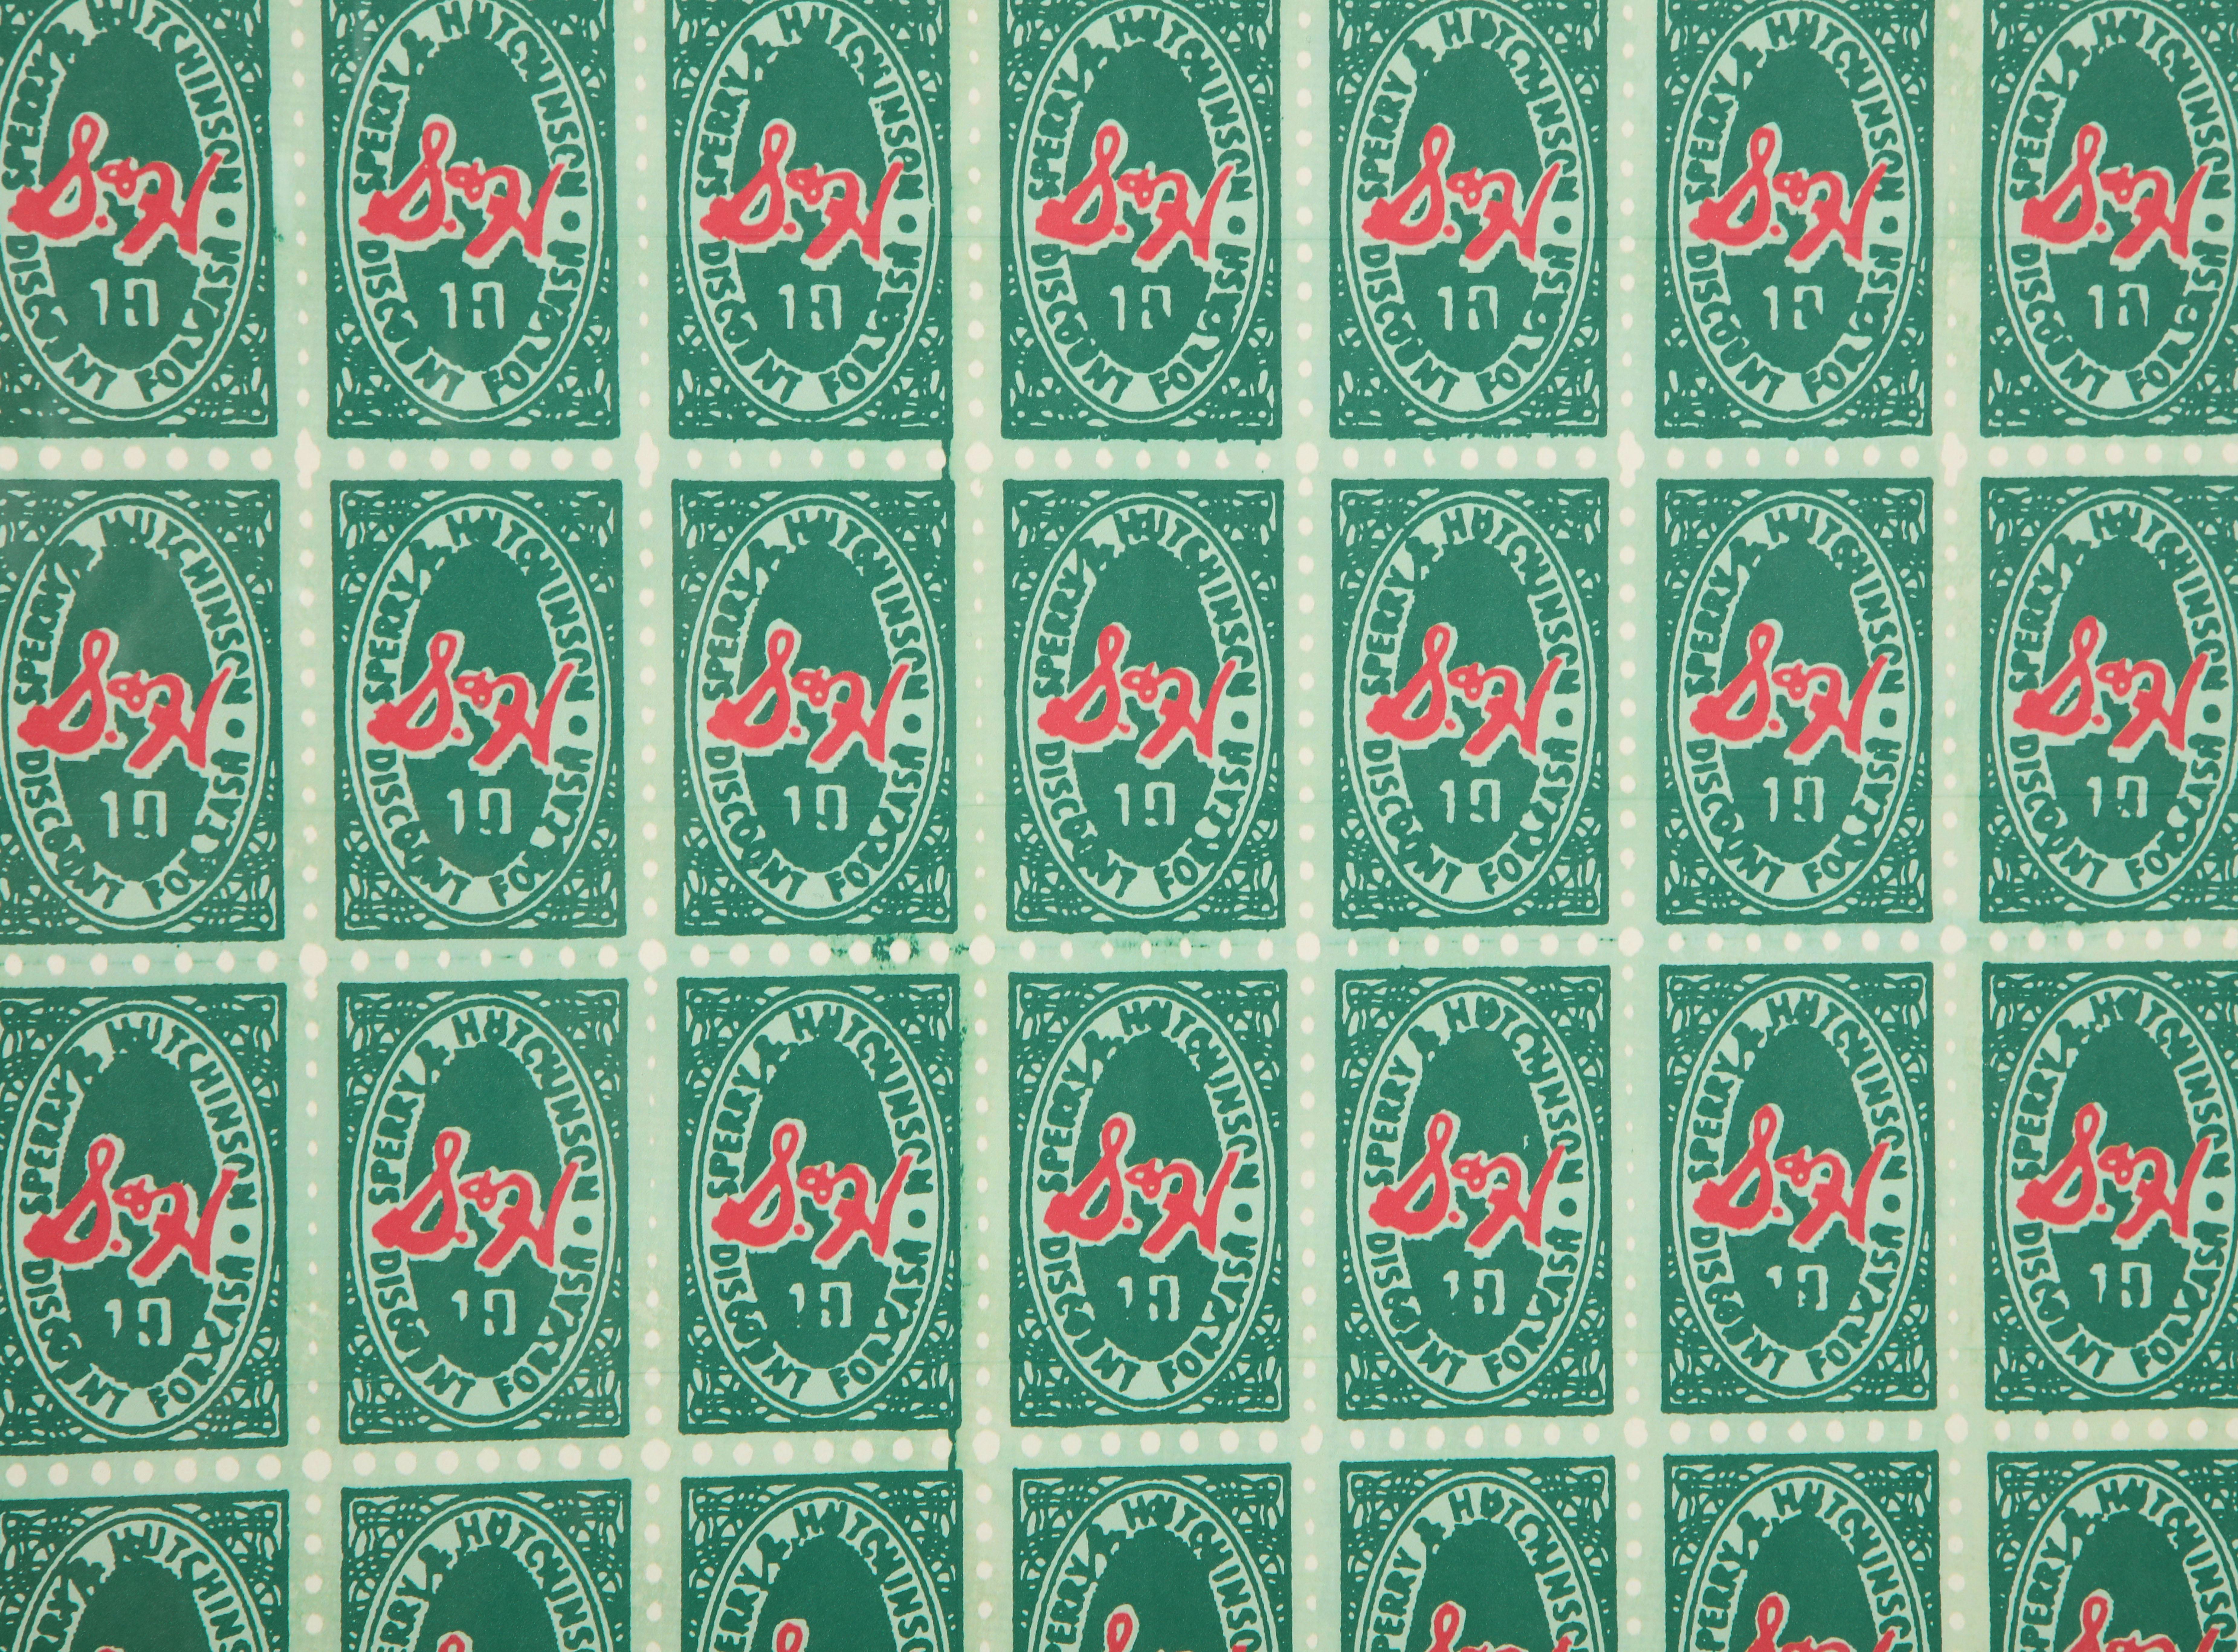 S & H Green Stamps After Andy Warhol Mailer Invitation  - Gray Print by (after) Andy Warhol